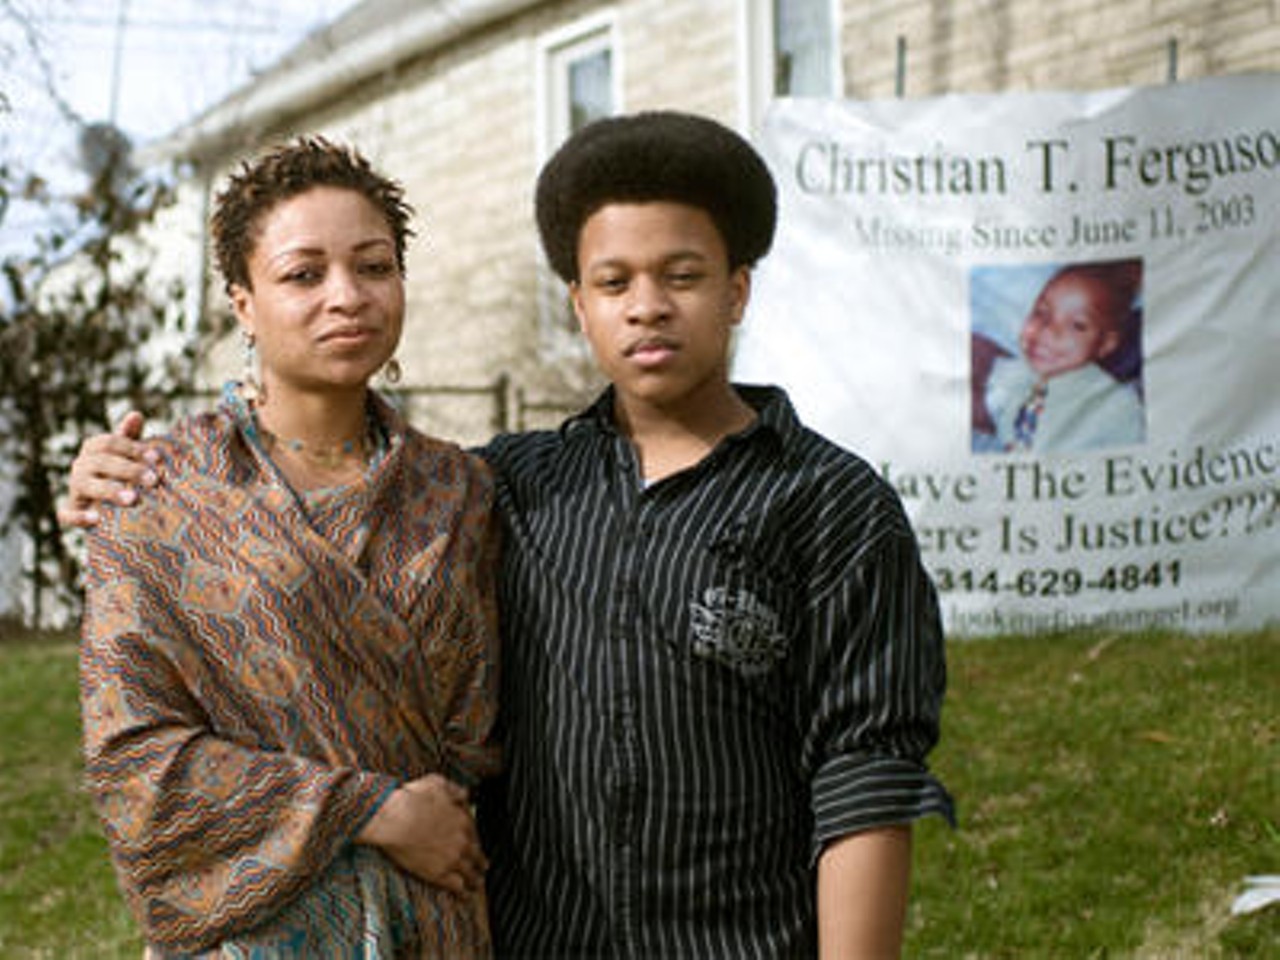 Vanishing Act: Scenes from a Kidnapping. View a location slide show from the alleged kidnapping of Christian Ferguson. Here stands his mother, Theda Thomas, and younger brother, now 14, Connor Ferguson. More photos.